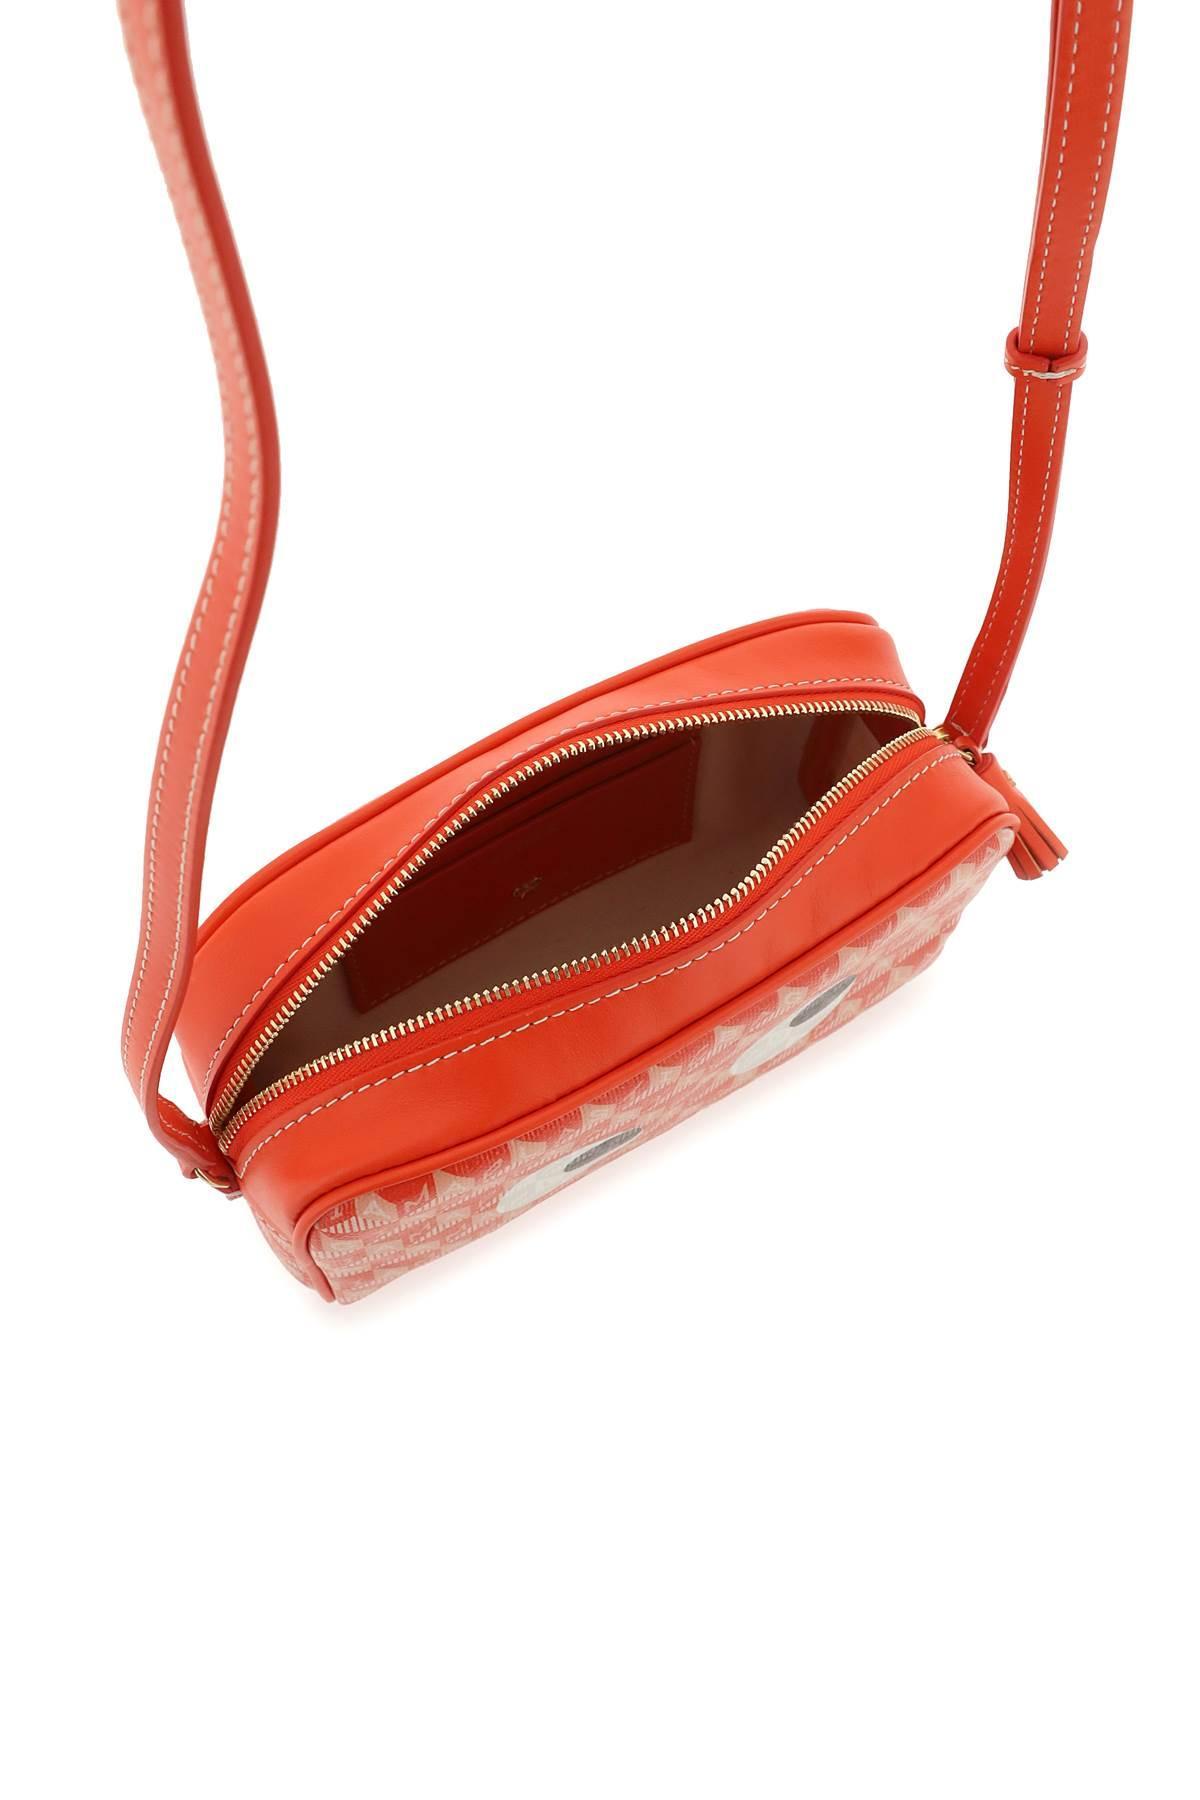 Metafor romersk Imagination Anya Hindmarch 'i Am A Plastic Bagwith Eyes' Crossbody Bag in Red | Lyst